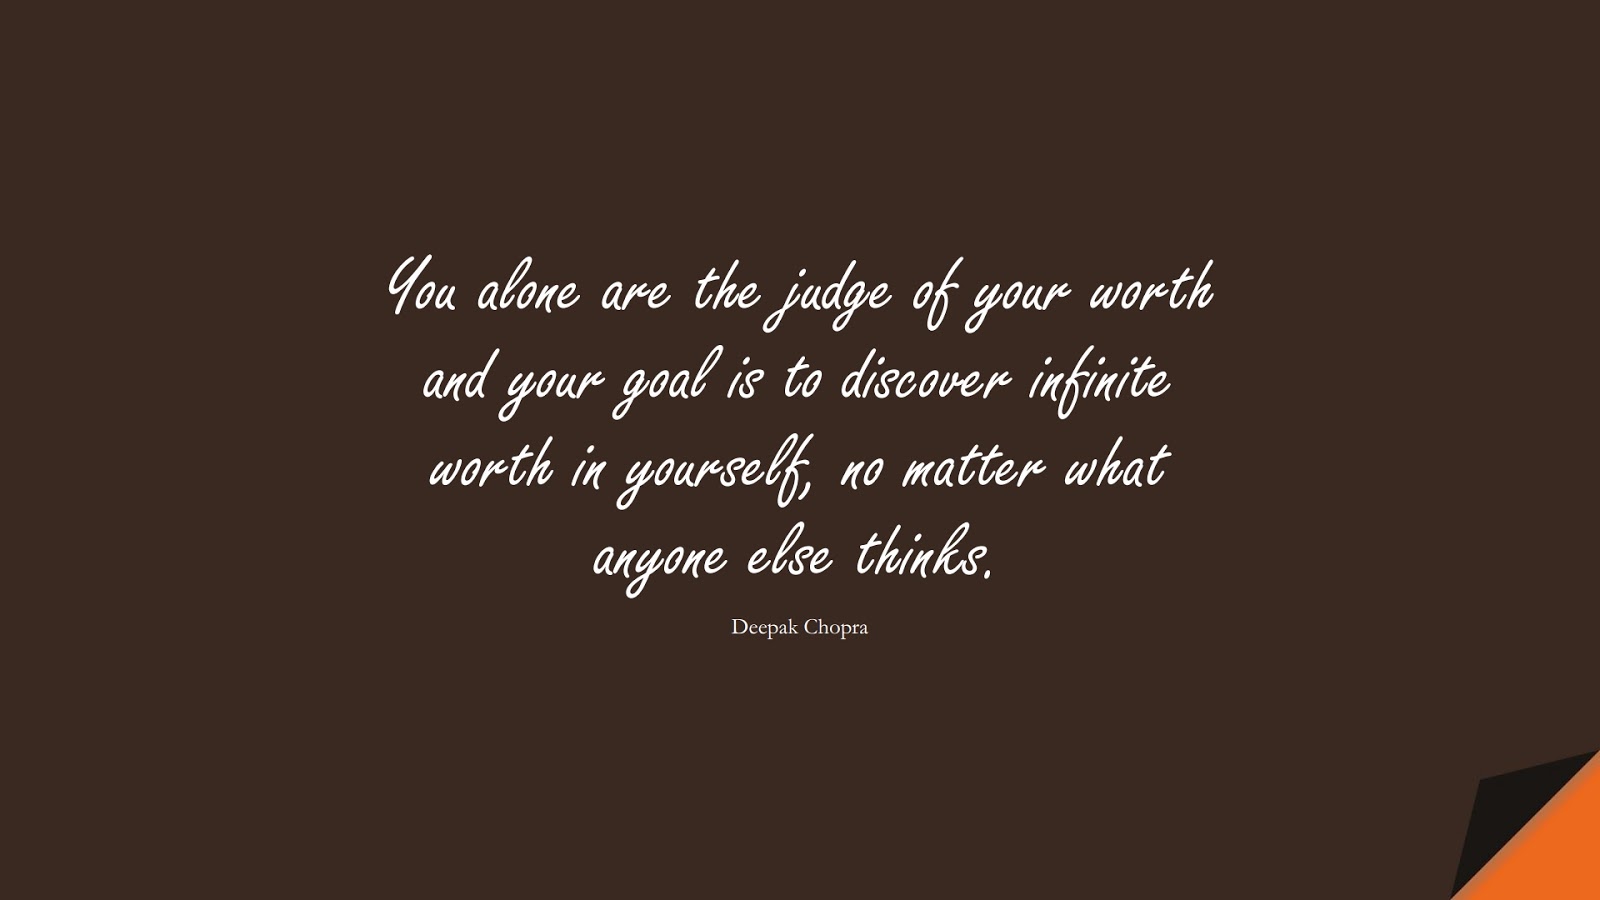 You alone are the judge of your worth and your goal is to discover infinite worth in yourself, no matter what anyone else thinks. (Deepak Chopra);  #LoveYourselfQuotes